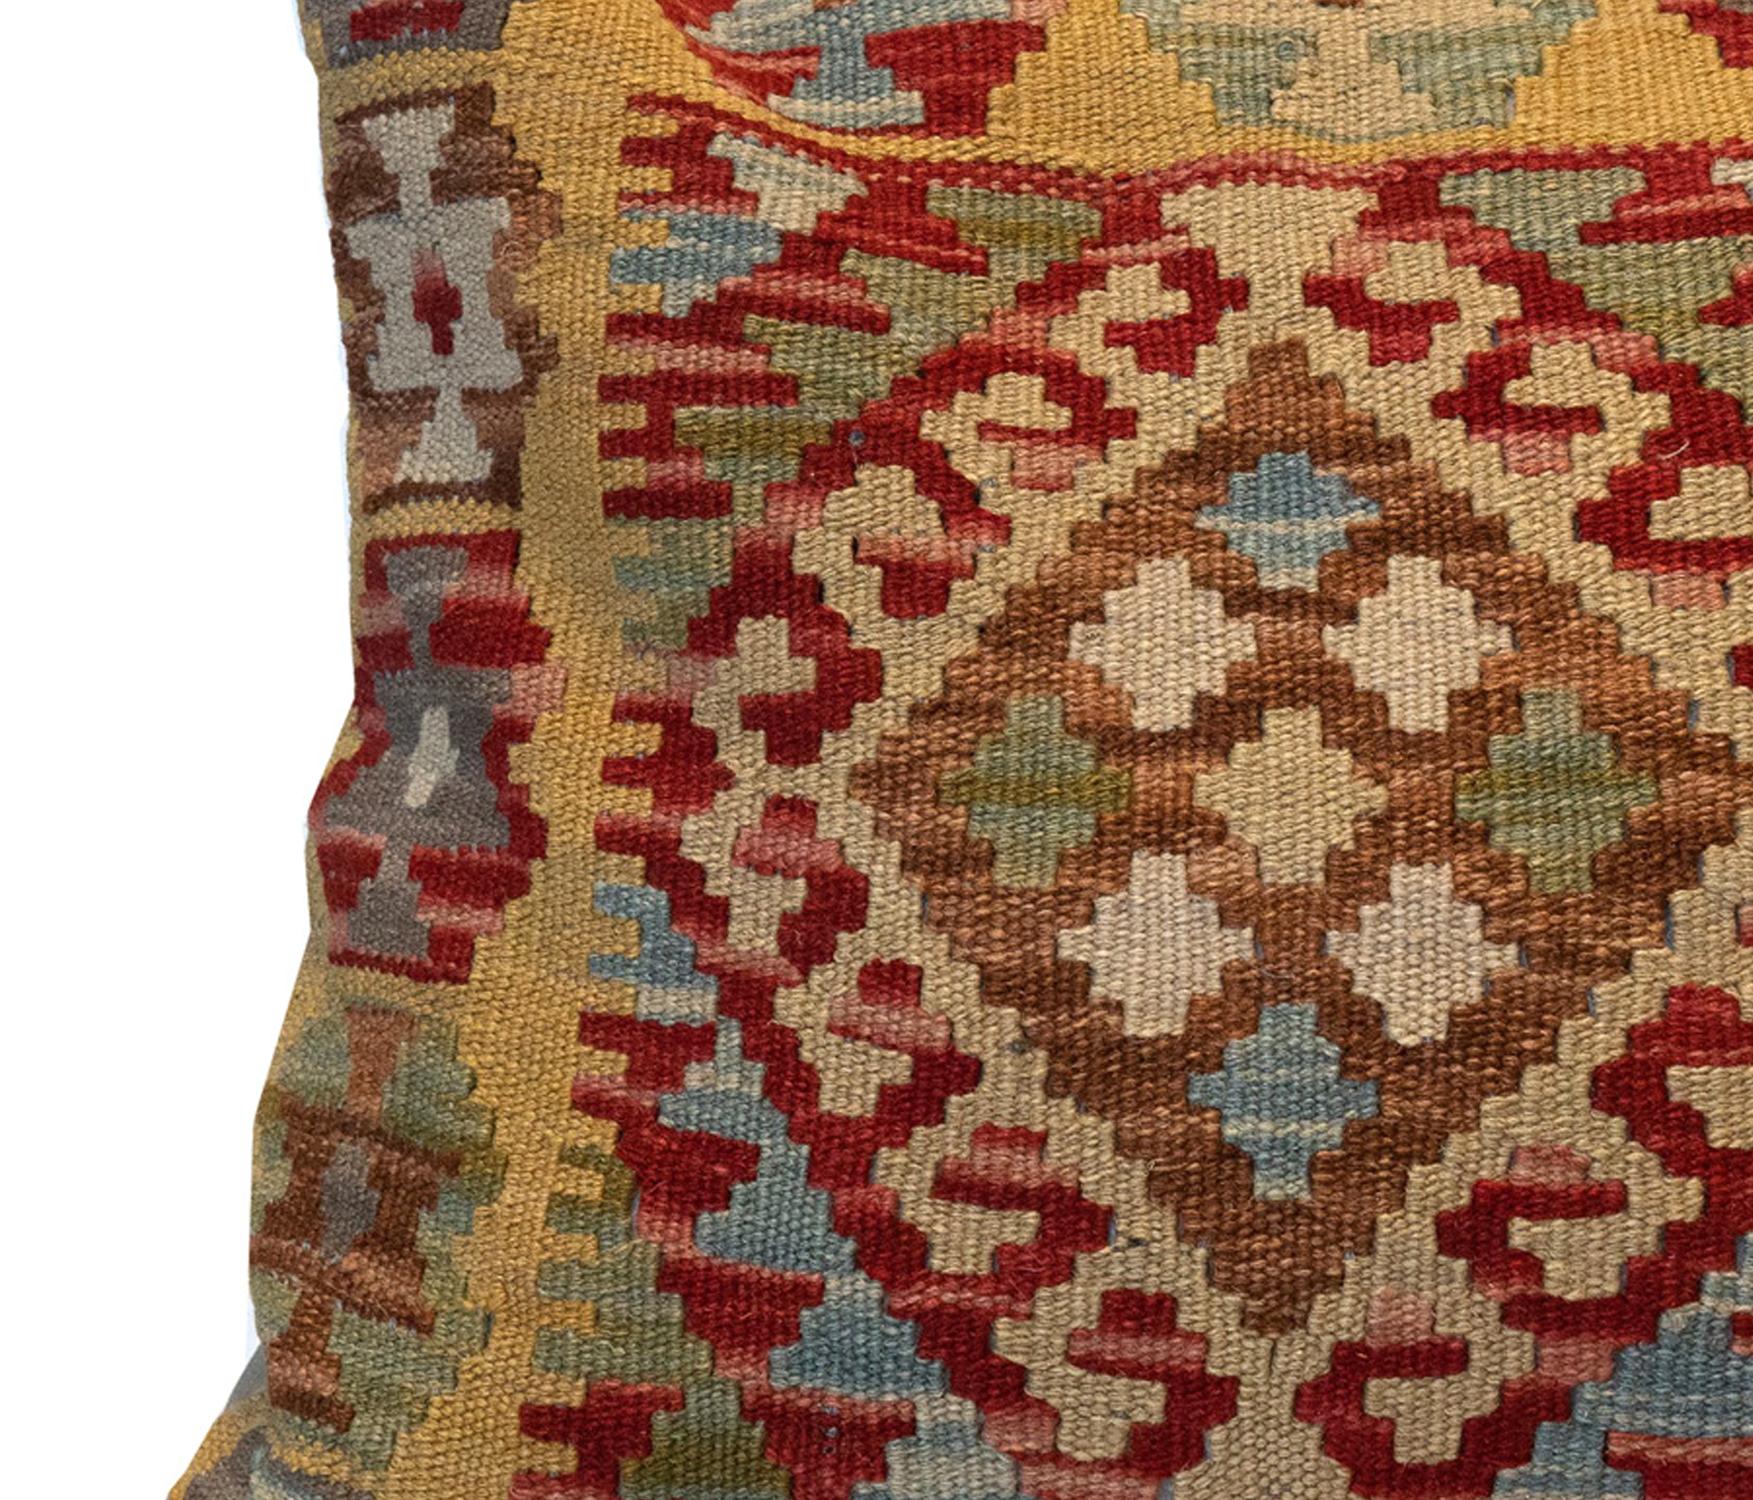 This fantastic cushion has been woven by hand using traditional kilim weaving techniques with hand-spun wool. They featured asymmetrical geometric patterns woven in beautiful rustic colours, including olive green, beige, blue and rust red. These